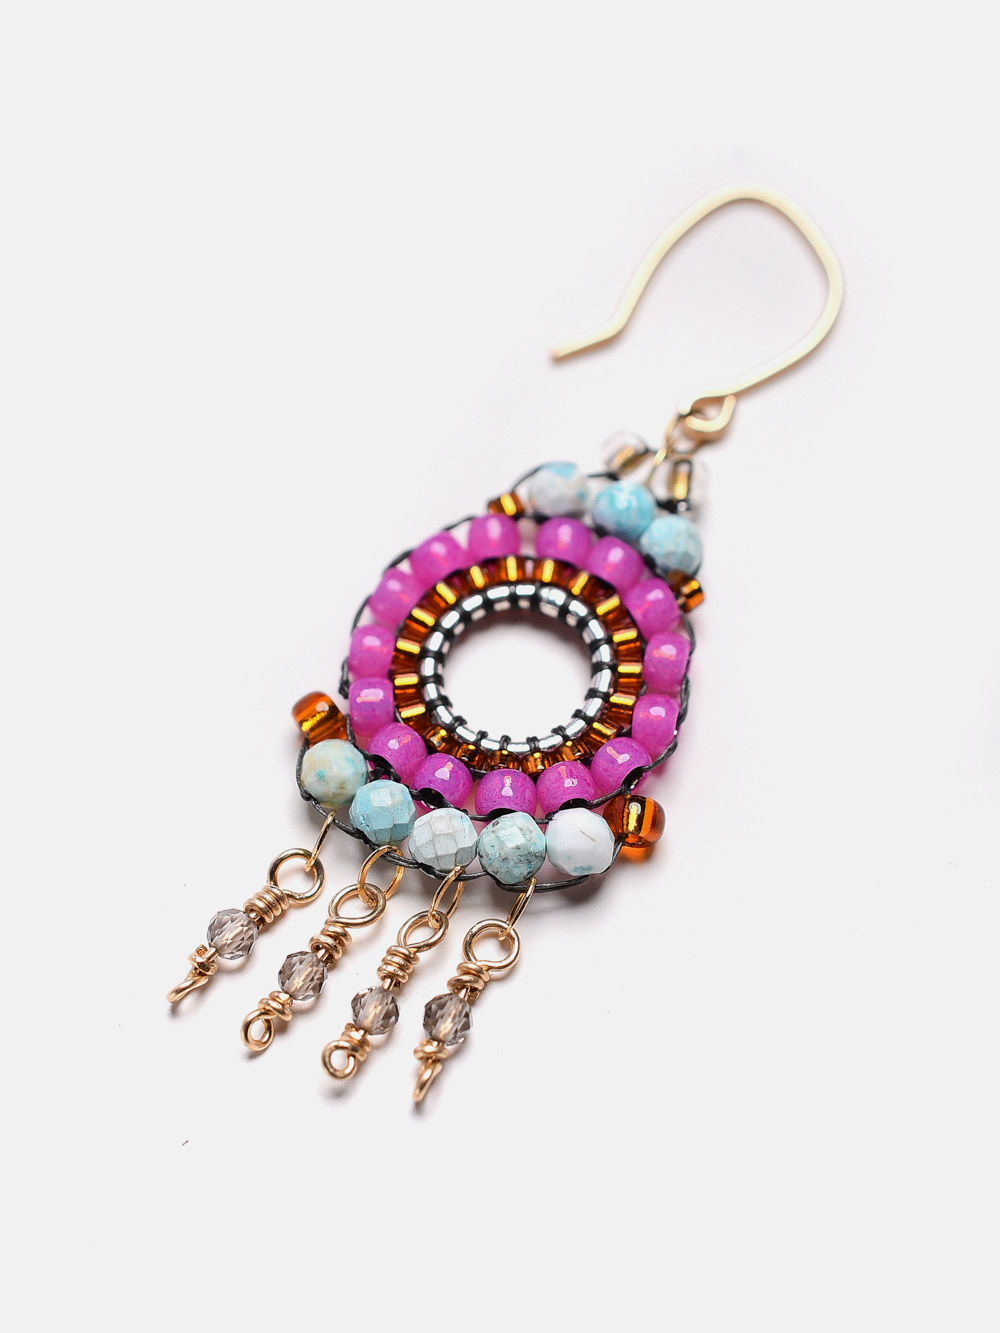 14k gold filled and 925 sterling silver drop earrings with semi-precious stones and japanese beads